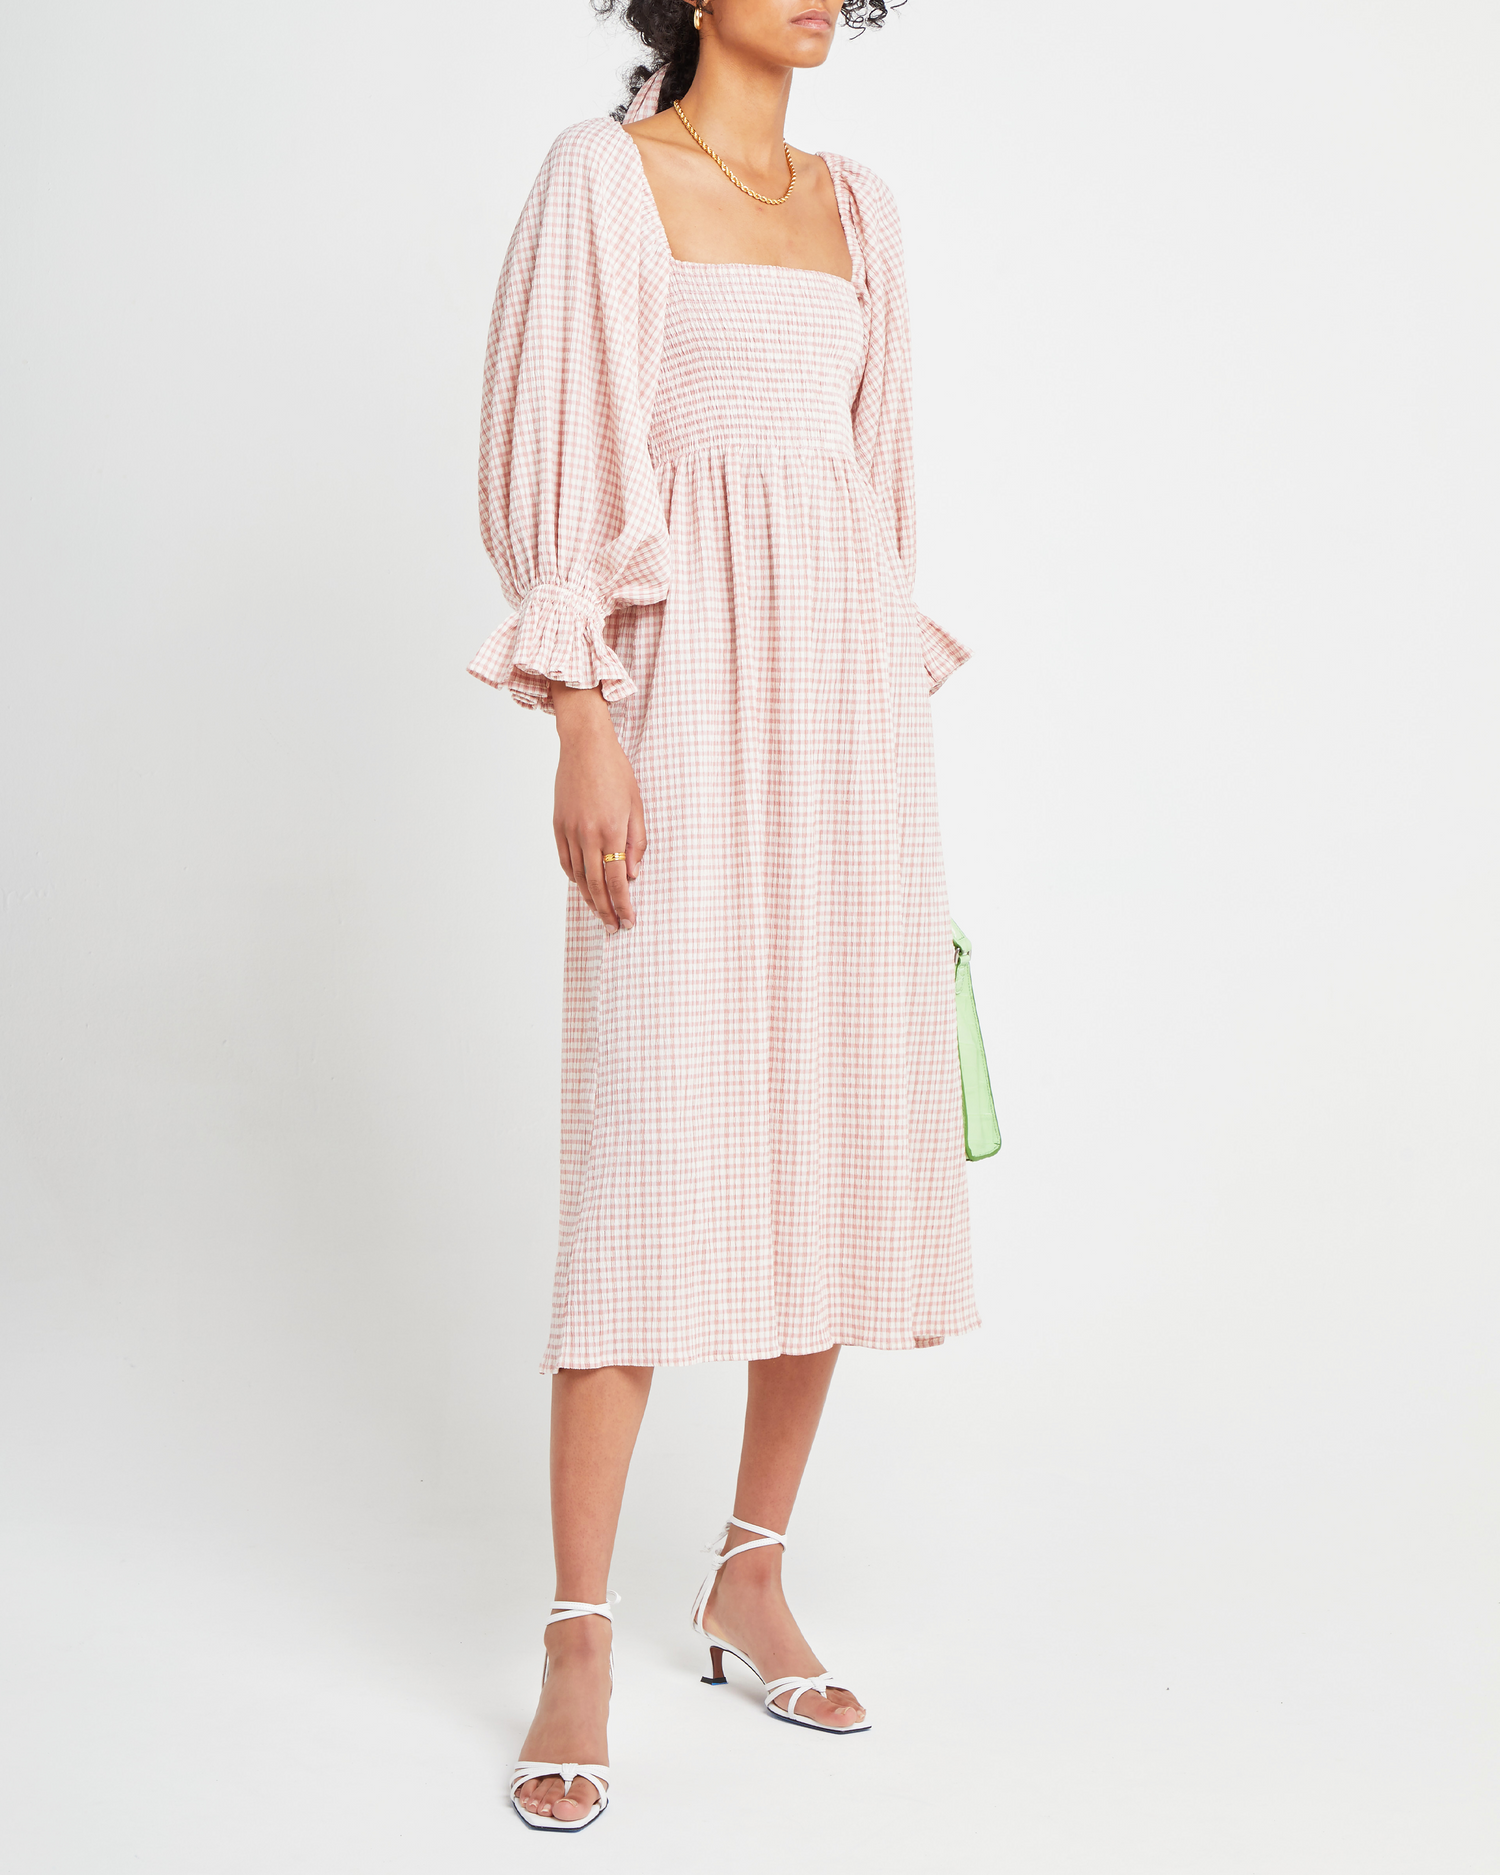 Fourth image of Athena Dress, a pink midi dress, off shoulder, long sleeve, puff sleeves, smocked